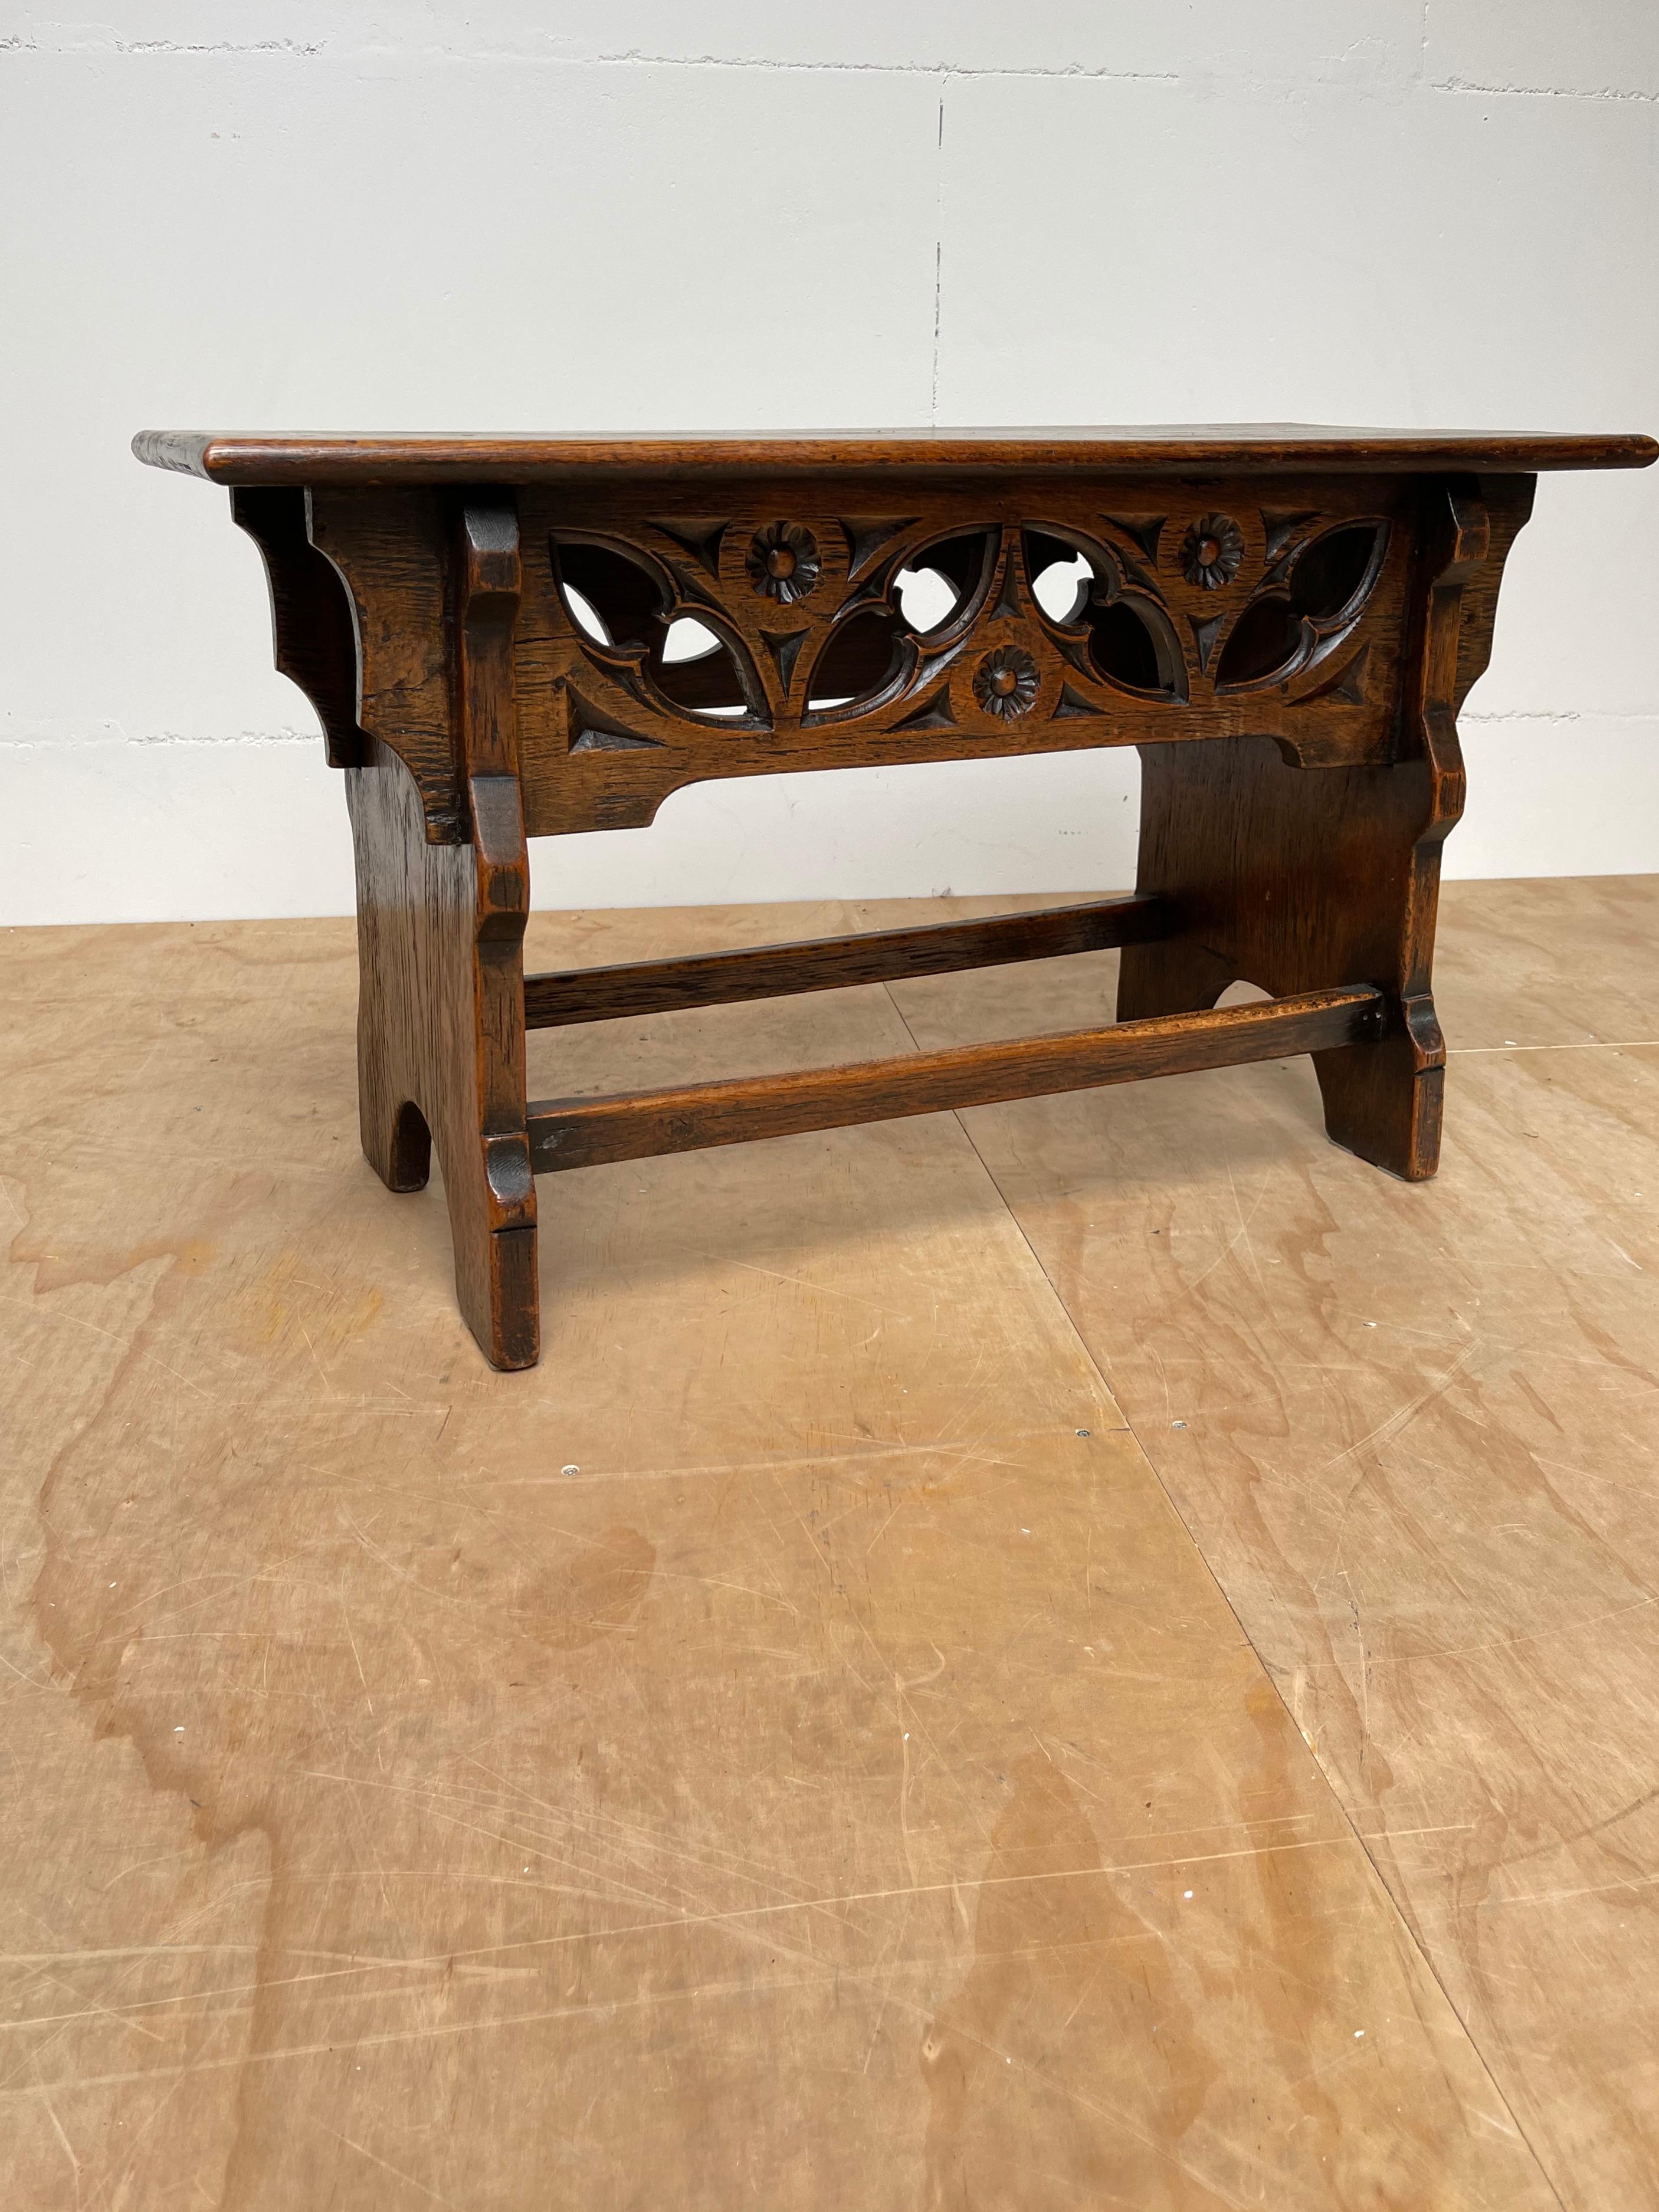 Antique Early 1900s Gothic Revival Stool or Table with Hand Carved Elements For Sale 7